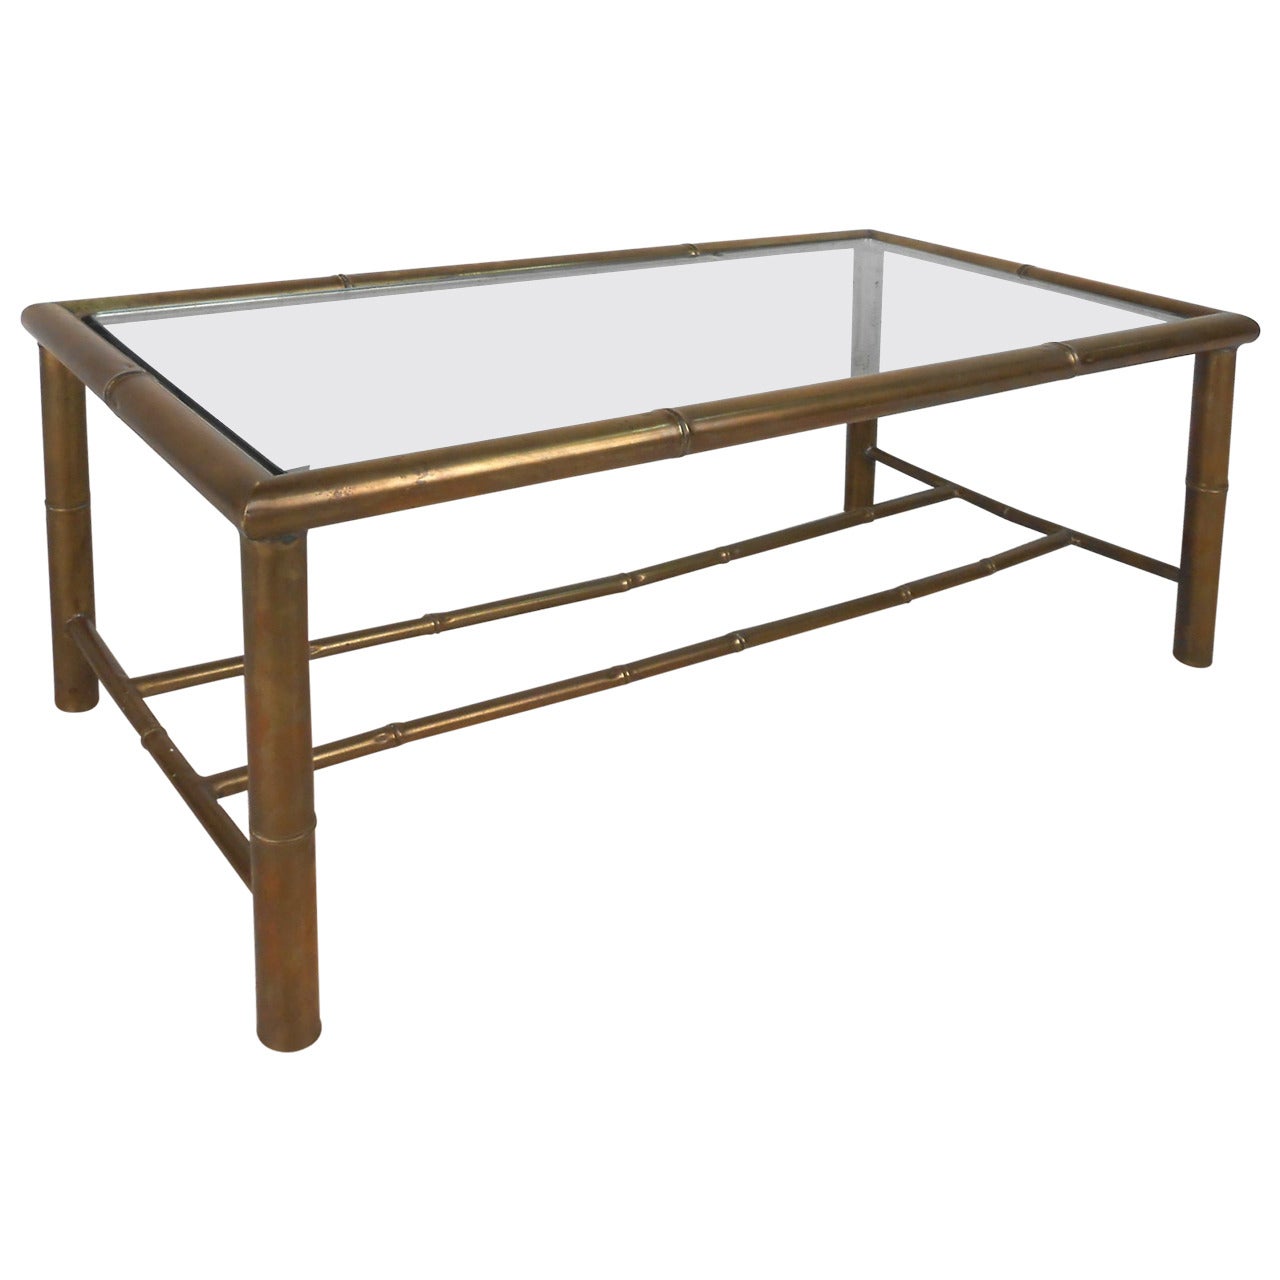 Hollywood Regency Style Mid-Century Modern Brass Faux Bamboo Table